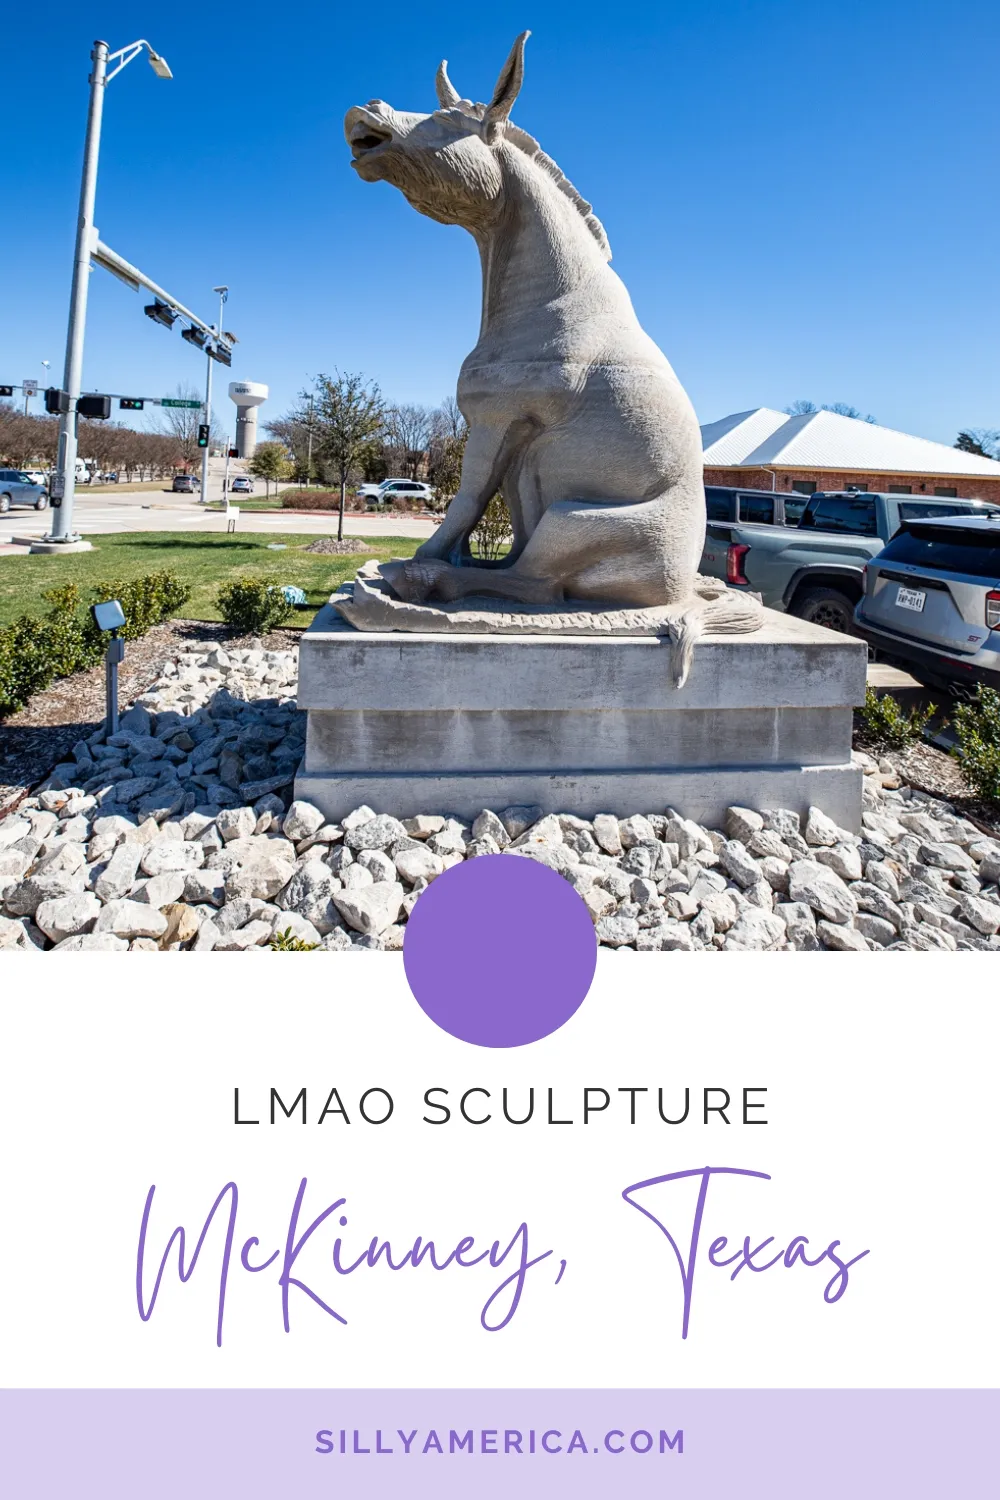 You'll get a kick out of this Texas roadside attraction! It's the LMAO Sculpture in McKinney, Texas (AKA Mule State AKA Laughing Jackass). Visit this local roadside attraction on your next Texas road trip. Add it to your travel itinerary! #RoadTrip #texasRoadTrip #FortWorth #FortWorthTexas #FortWorthAttractions #FortWorthTexasAttractions #RoadsideAttraction #RoadsideAttractions #TexasRoadsideAttraction #TexasRoadsideAttractions